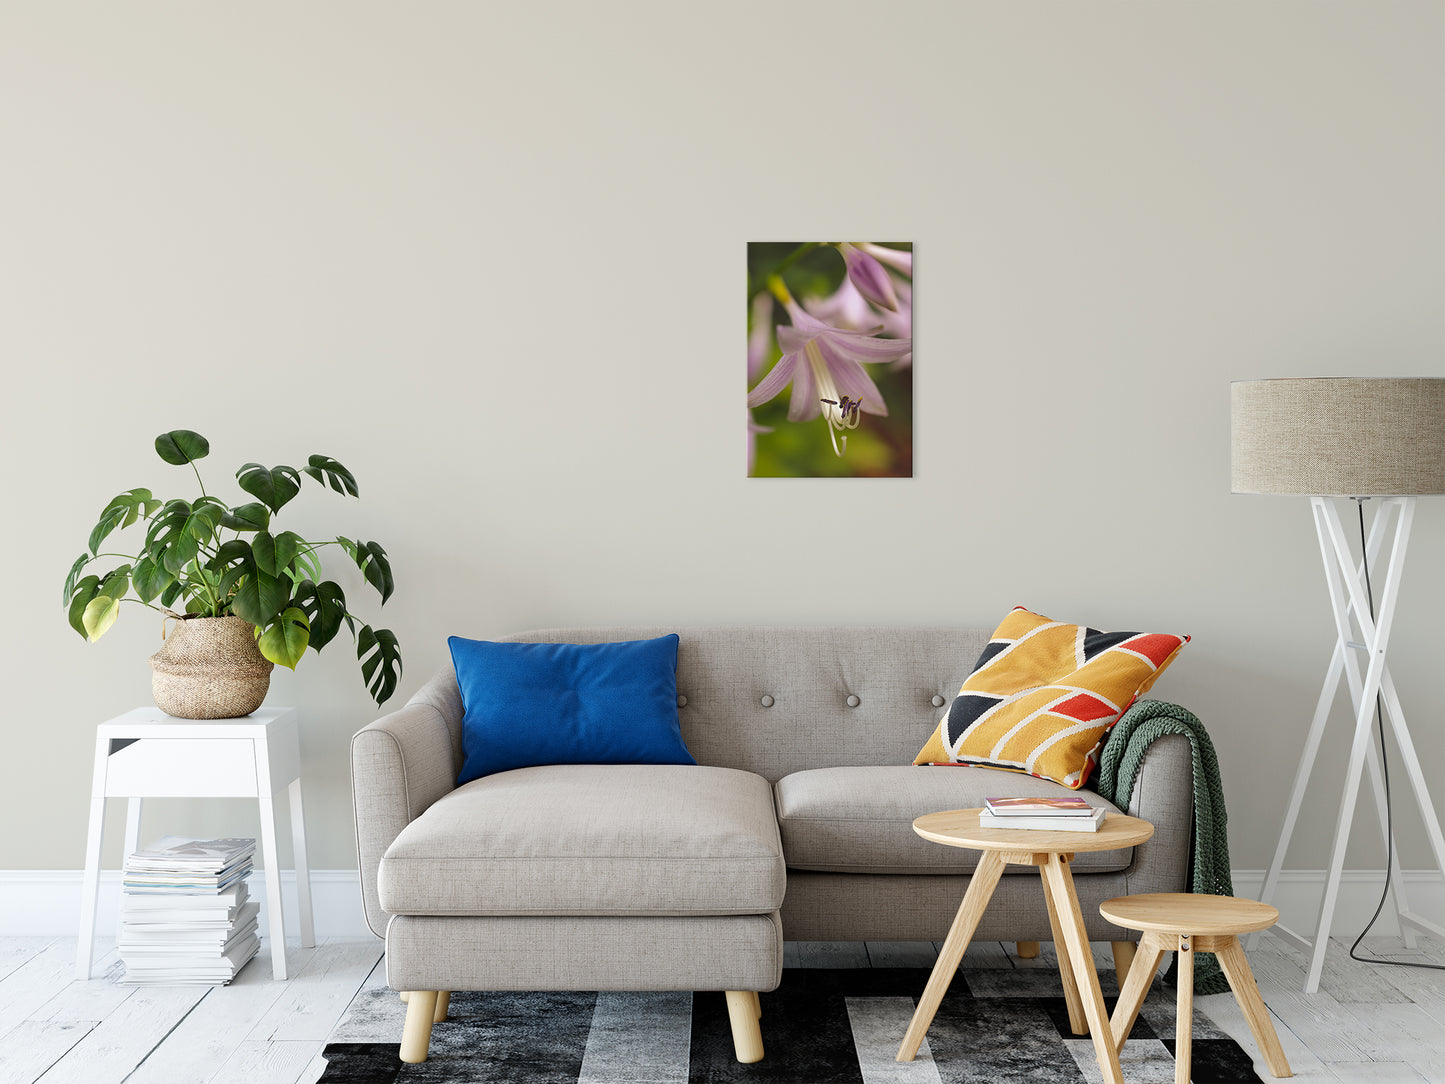 Close-up Hosta Bloom Nature / Floral Photo Fine Art Canvas Wall Art Prints 16" x 20" - PIPAFINEART